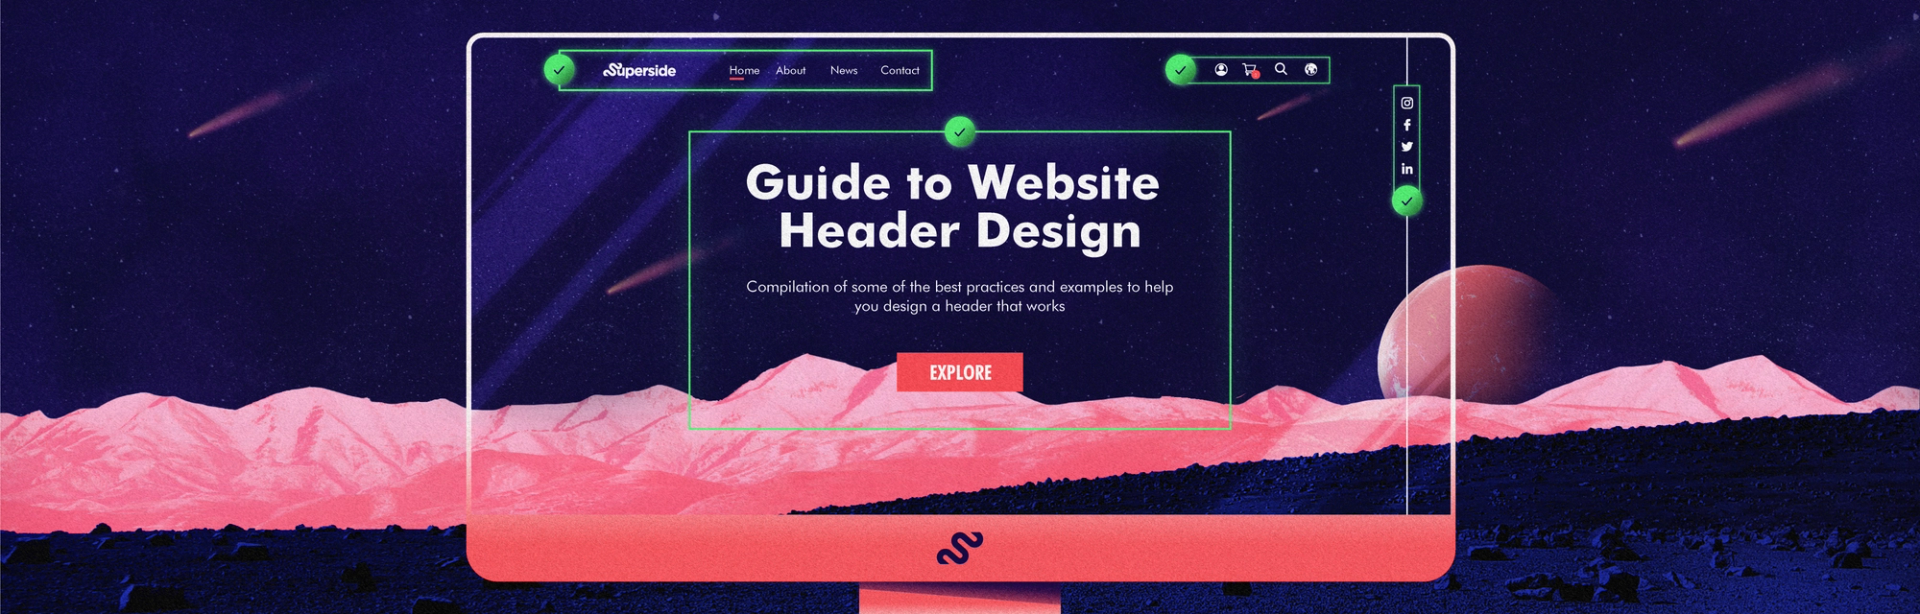 Guide to Creating a Performing Website Header Design